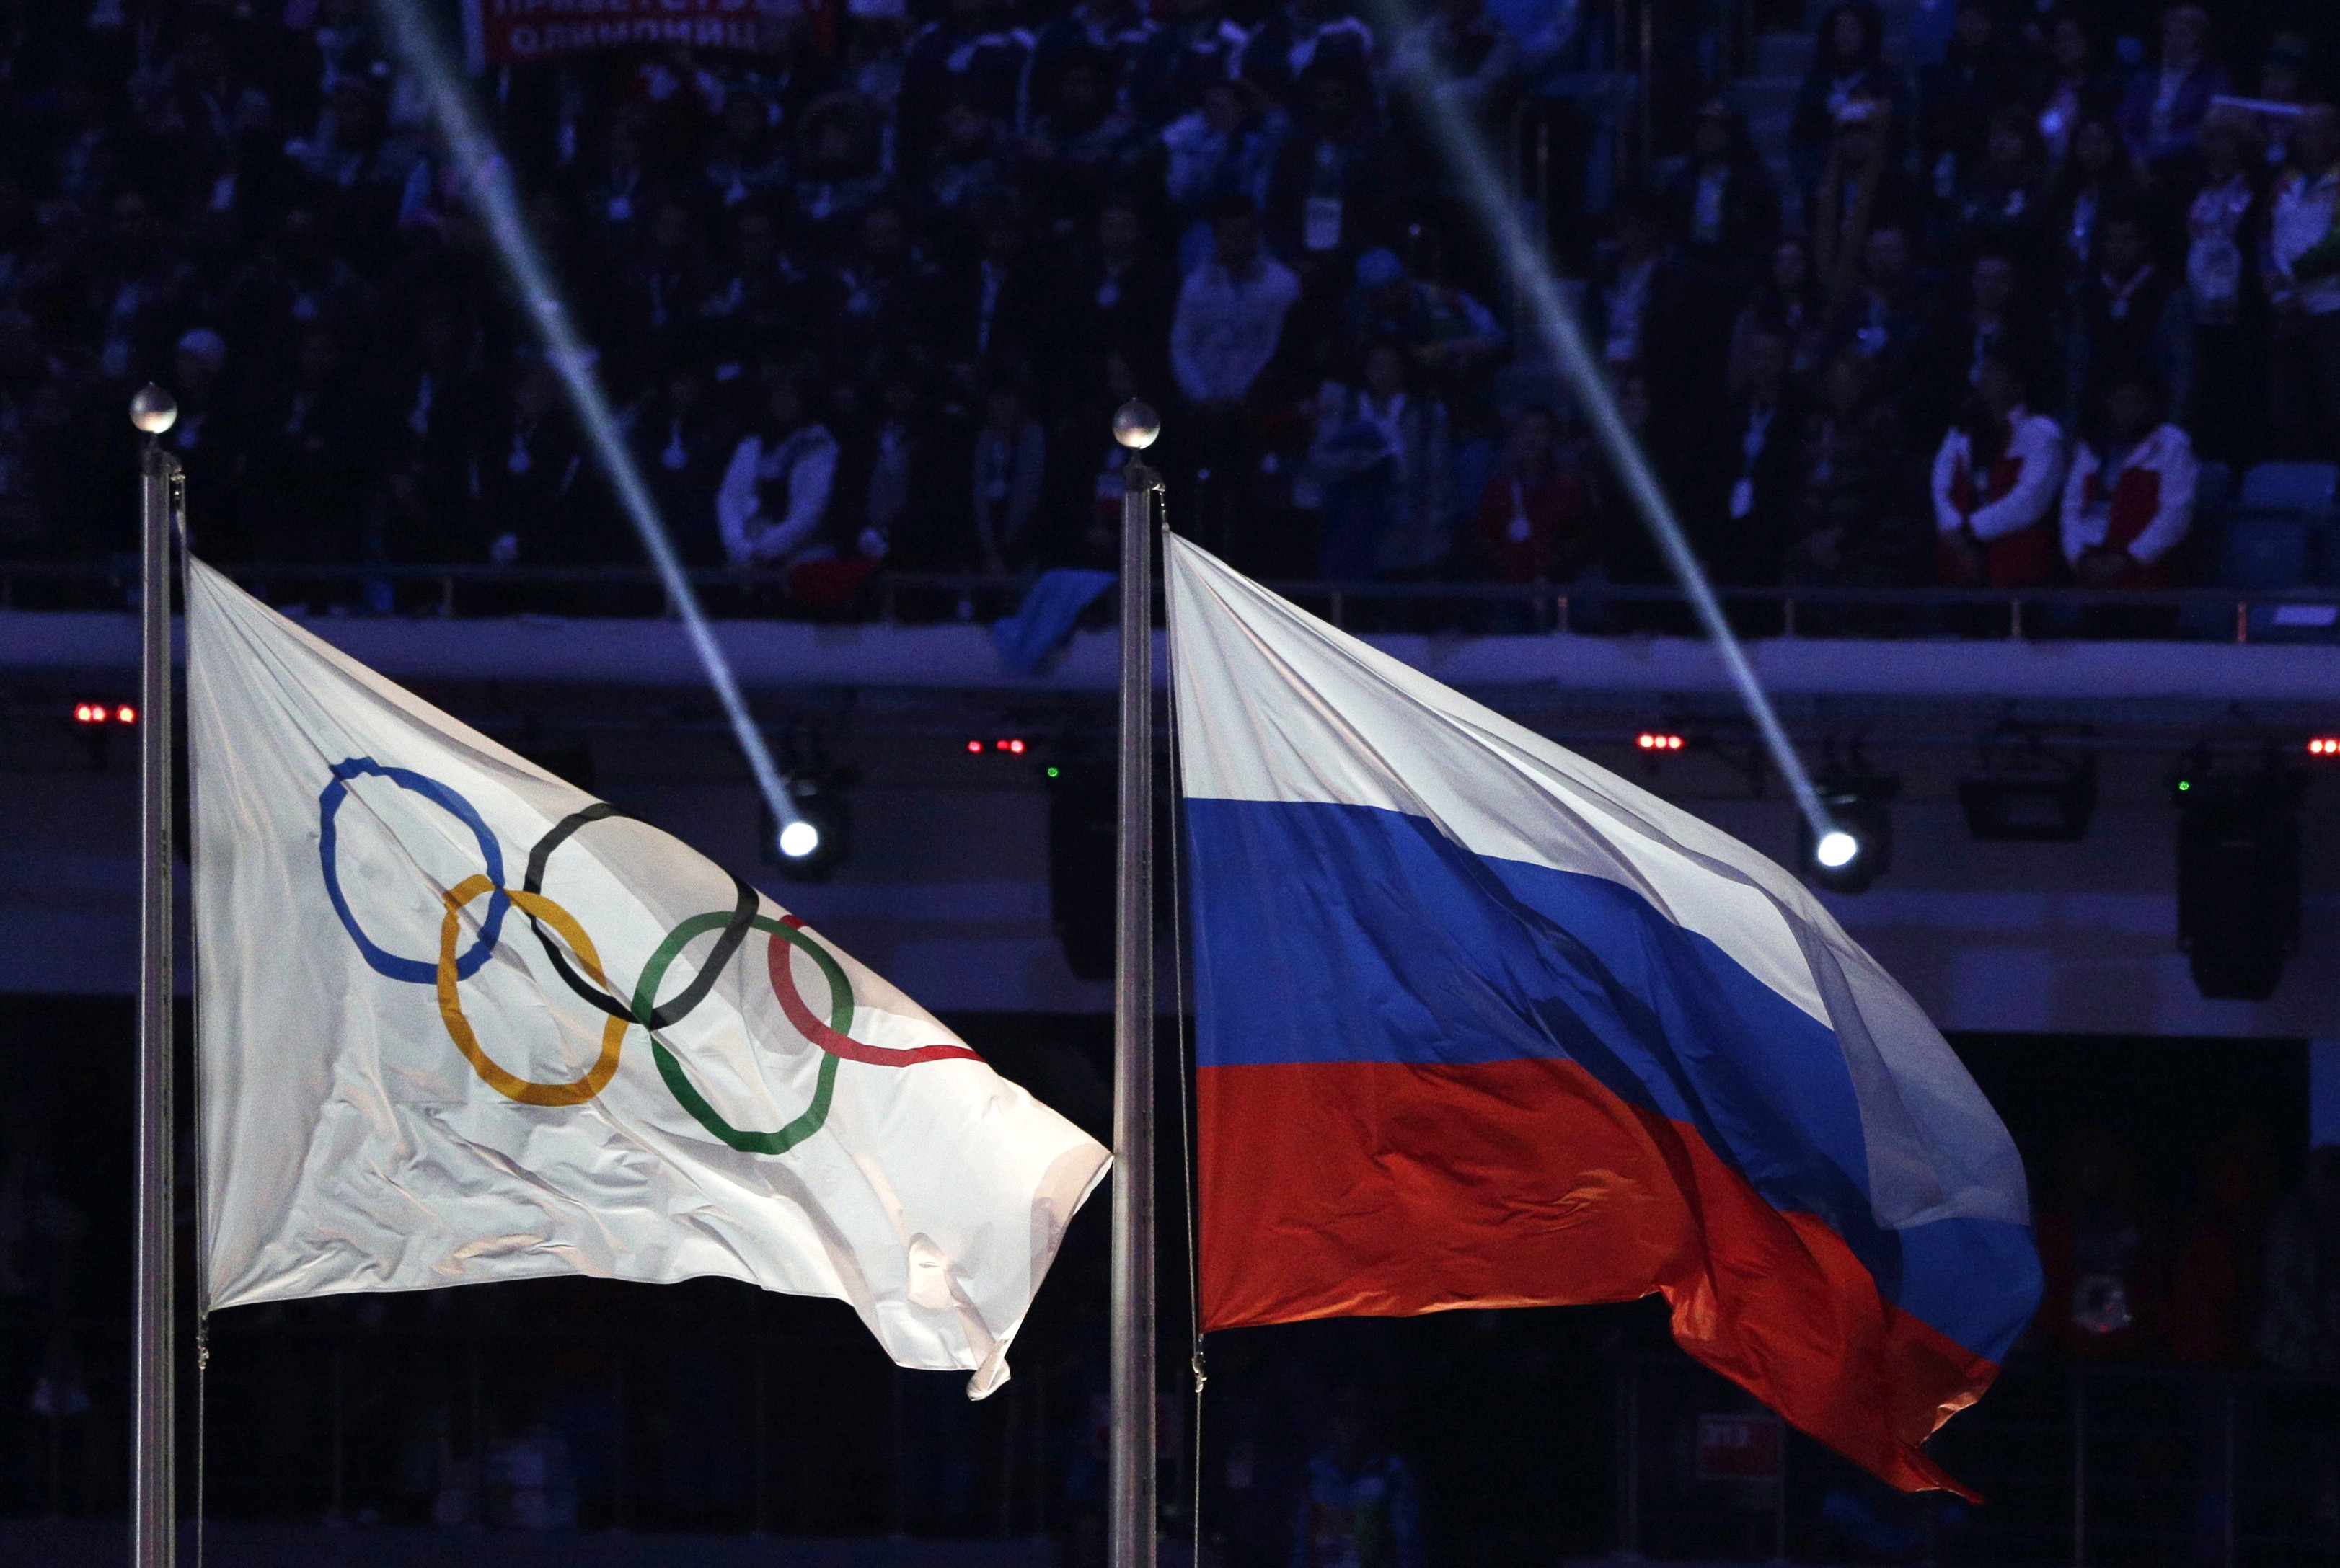 The Russian national flag flies after it is hoisted next to the Olympic flag during the closing ceremony of the 2014 Winter Olympics in Sochi, Russia. The World Anti-Doping Agency said it has a database proving widespread Russian doping. Photo: AP